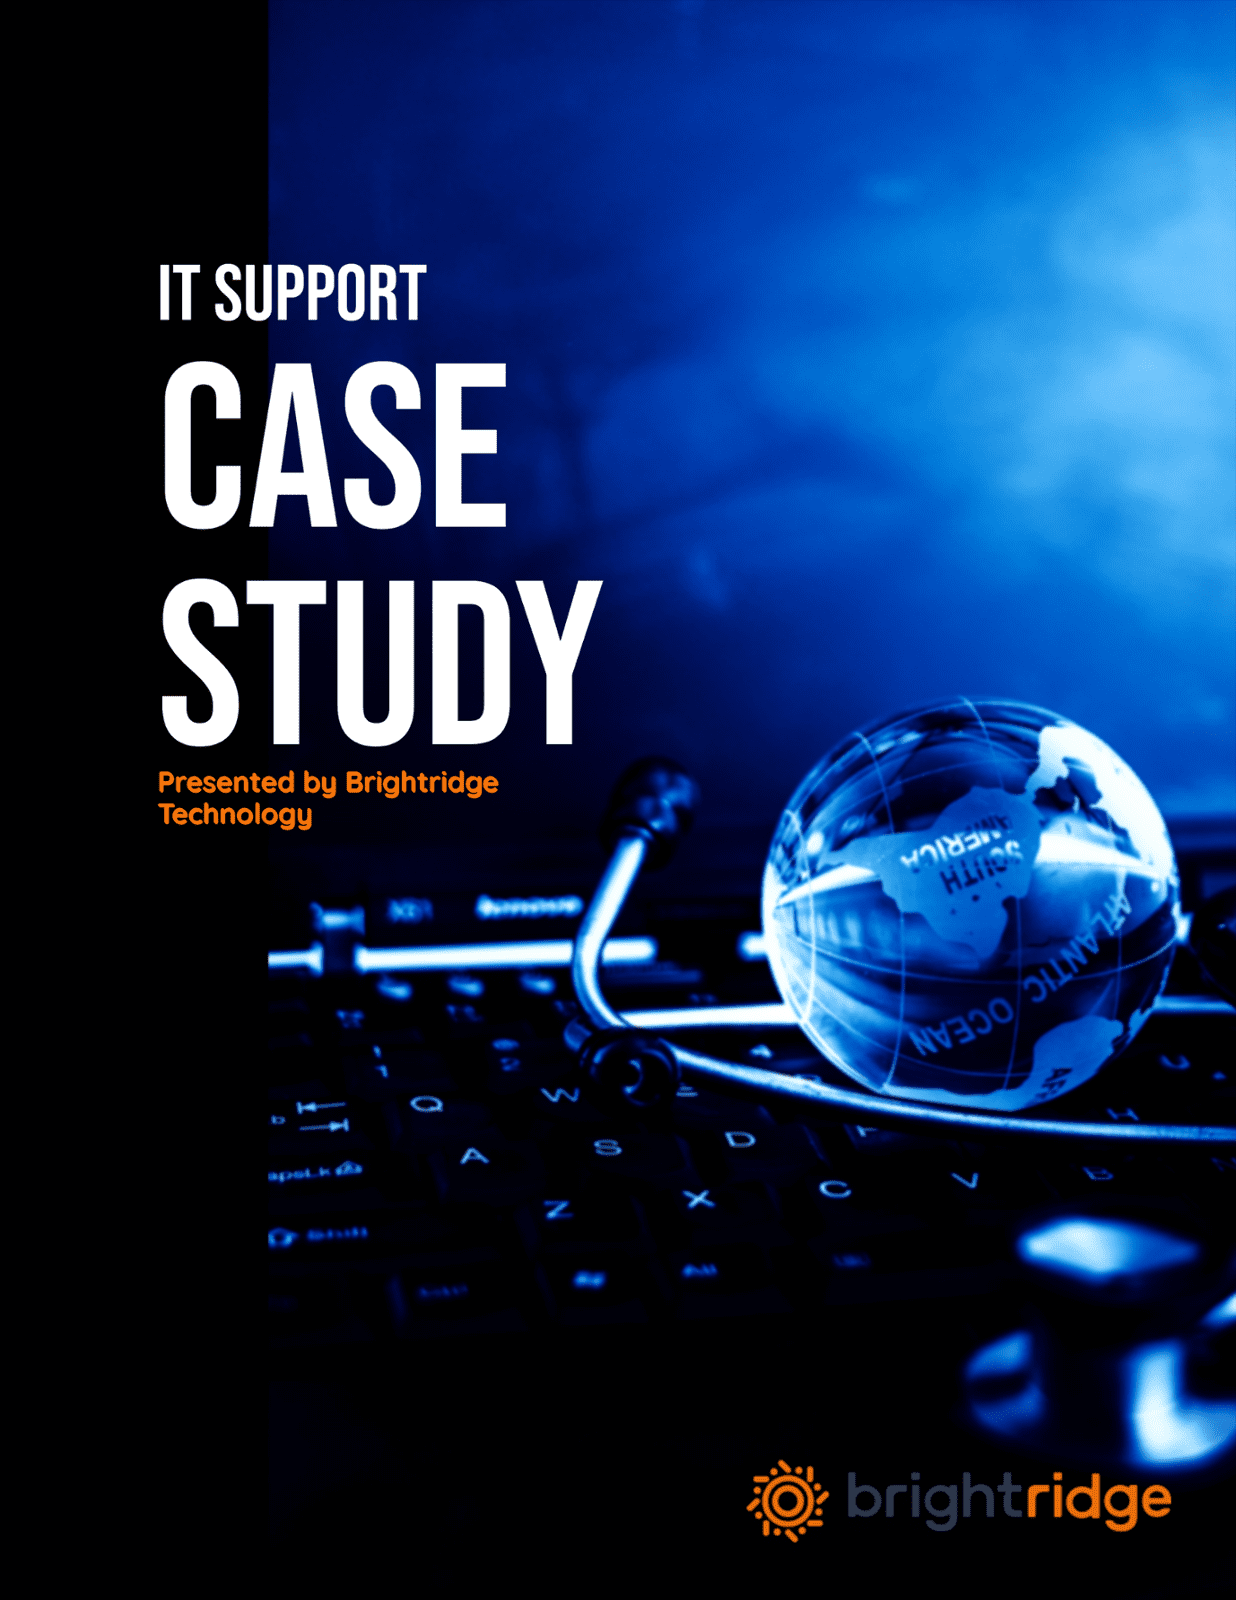 IT Support Case Study